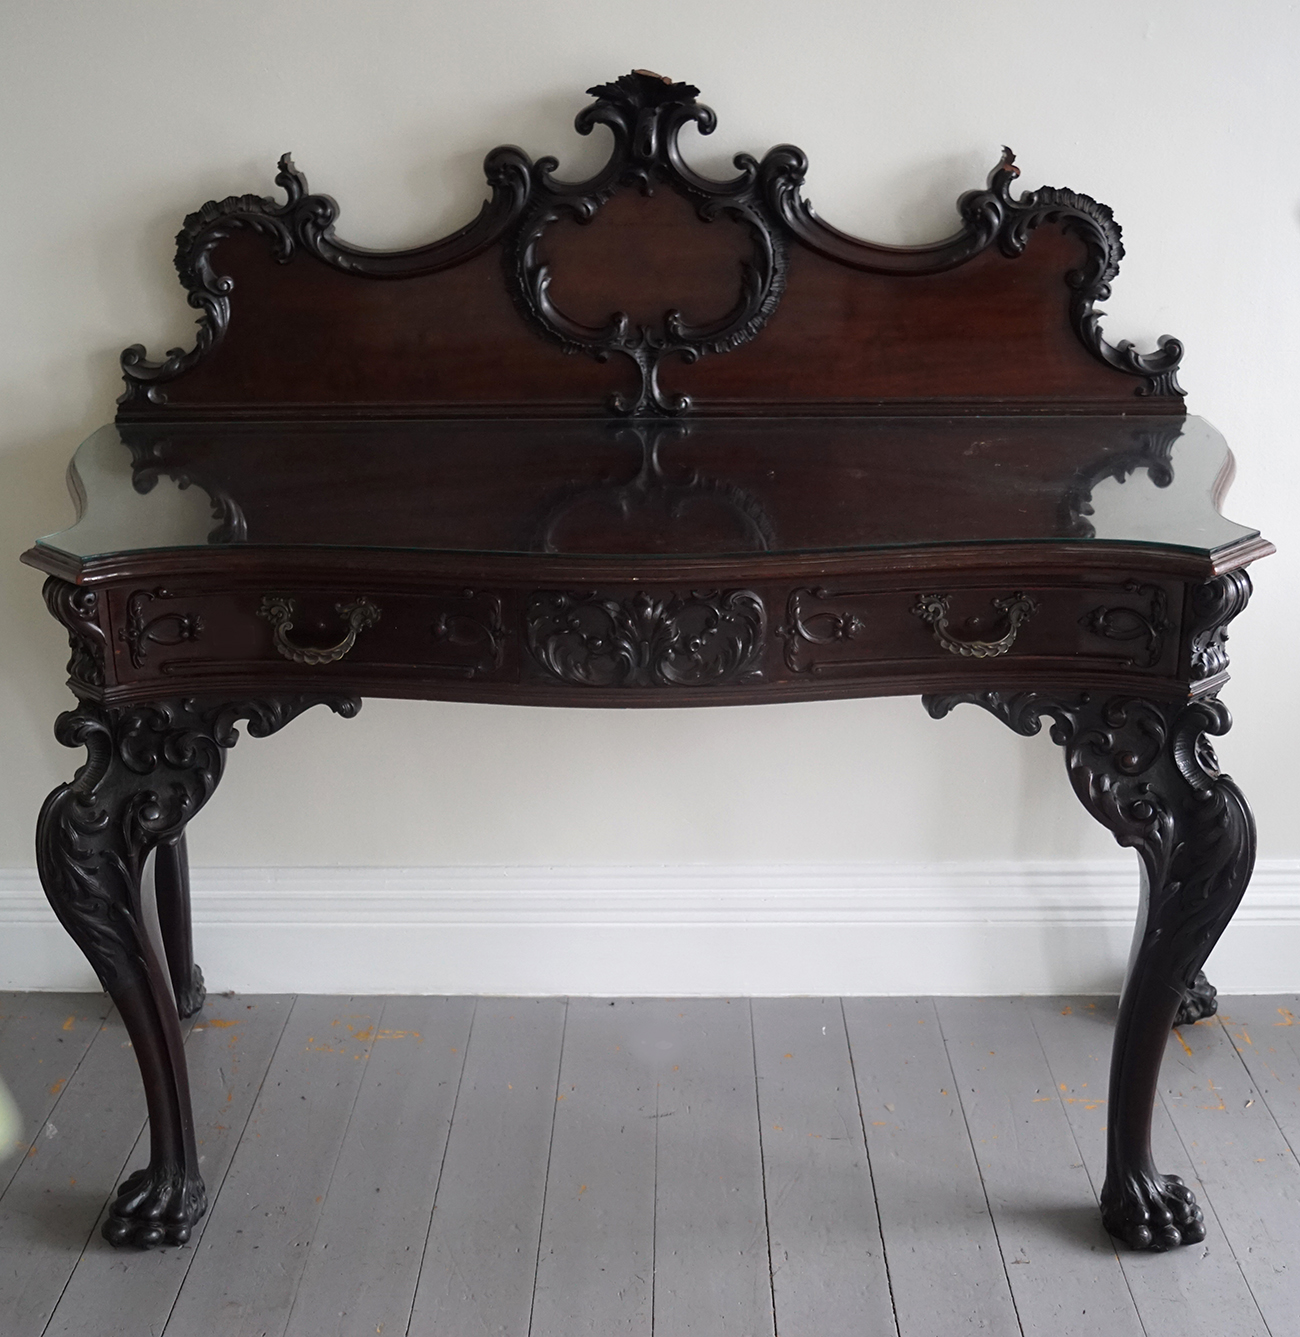 LARGE EDWARDIAN CHIPPENDALE SIDE TABLE - Image 3 of 6